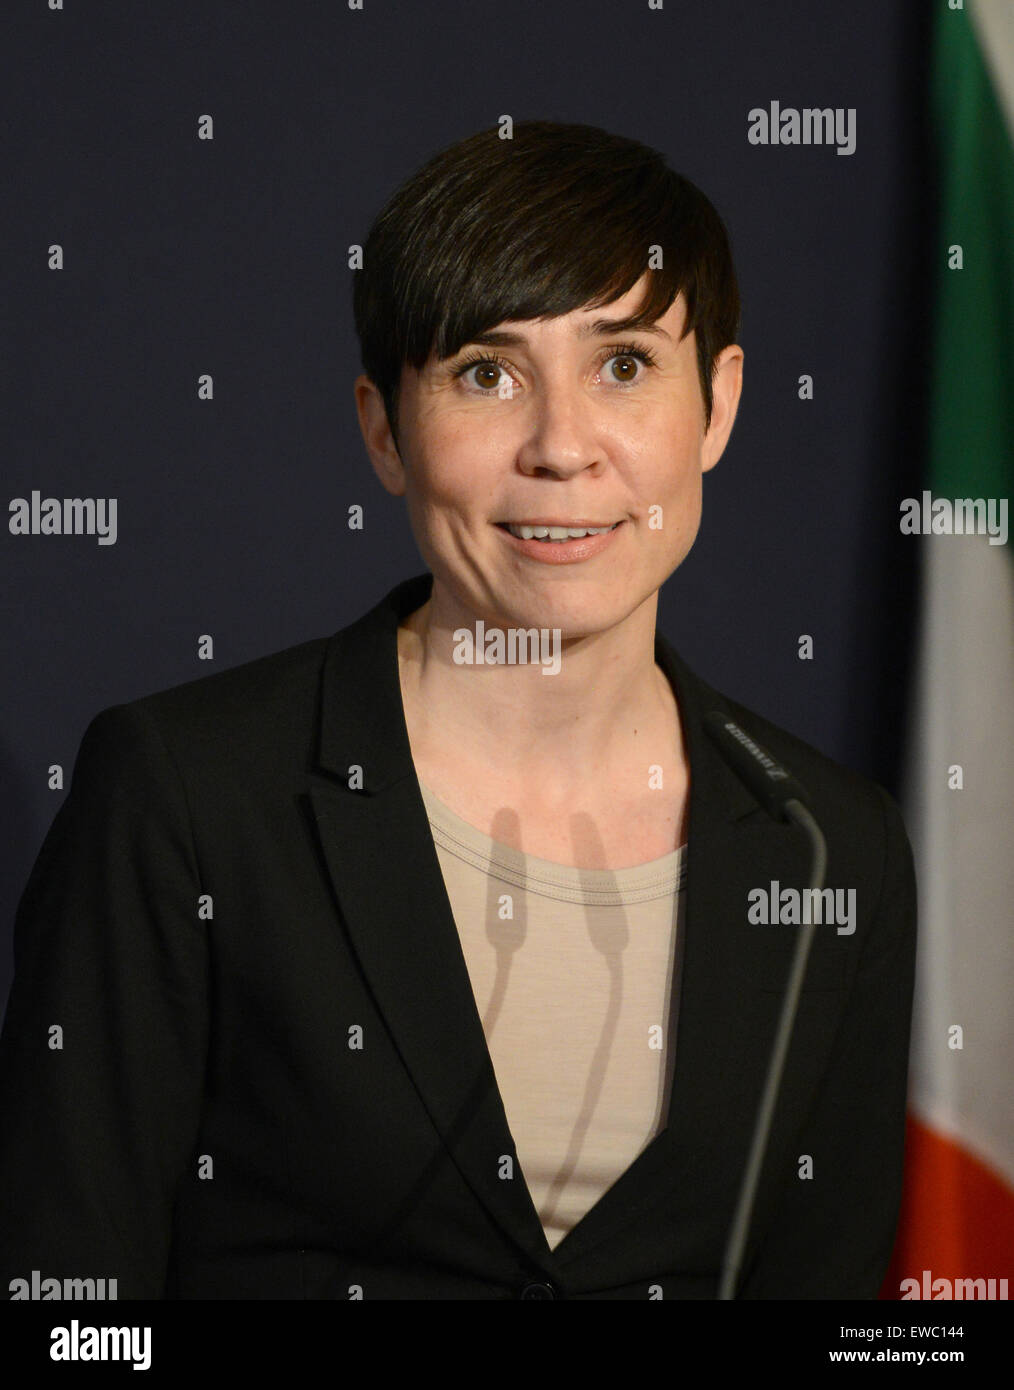 Muenster, Germany. 22nd June, 2015. Norwegian Defence Minster Ine Eriksen Soreide speaks during a press conference following a visit to the I. German/Netherlands Corps in Muenster, Germany, 22 June 2015. Photo: CAROLINE SEIDEL/dpa/Alamy Live News Stock Photo